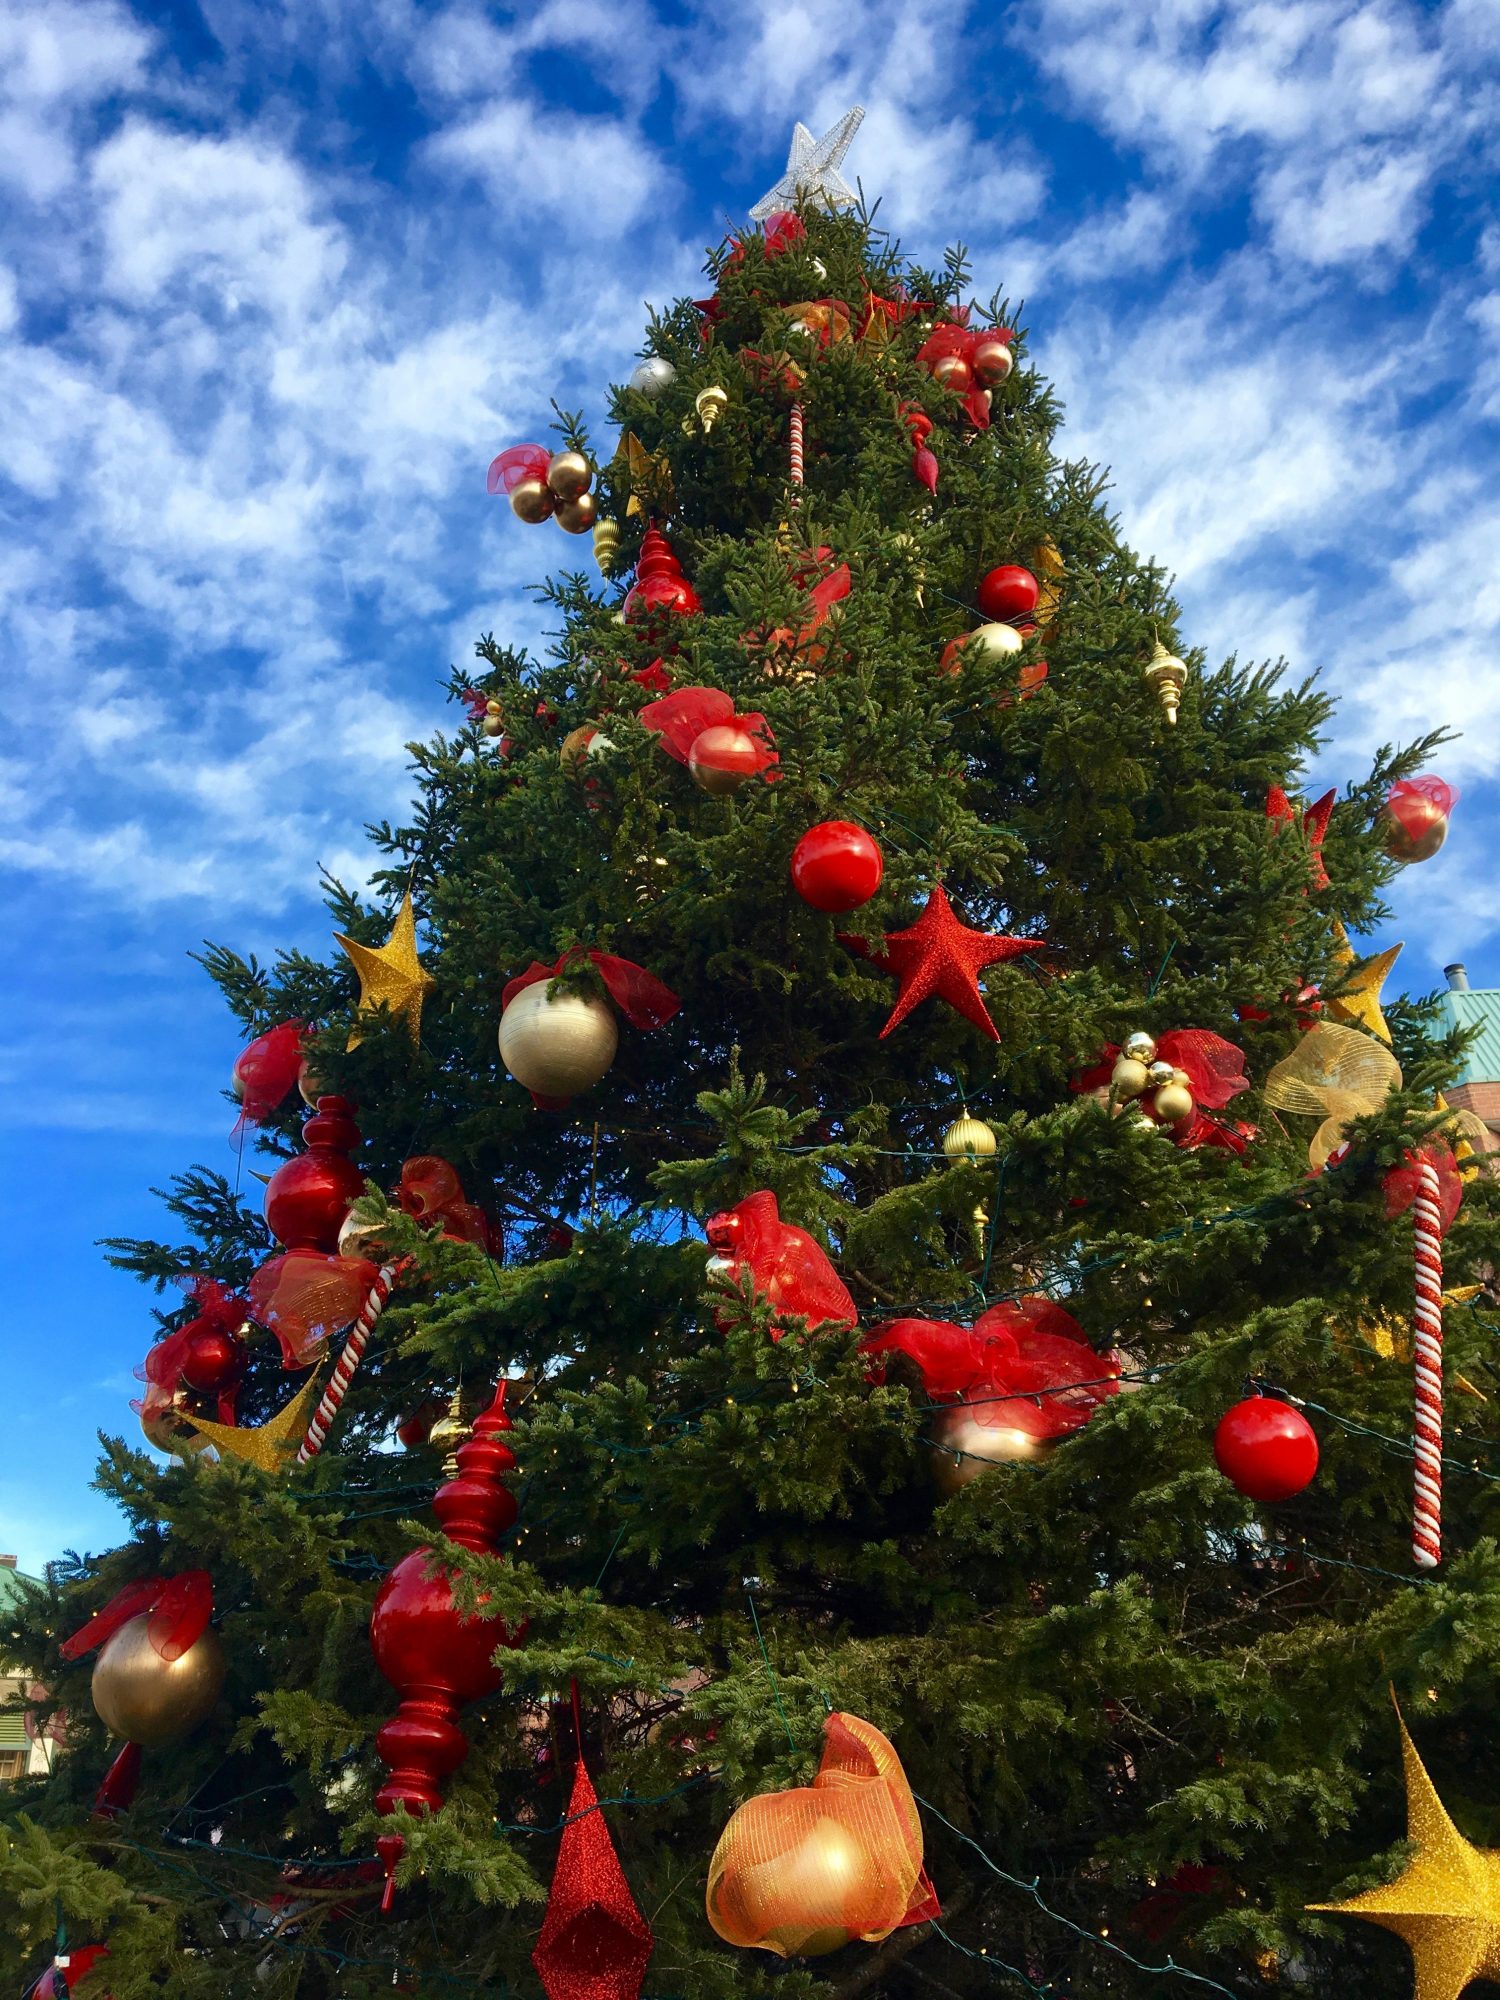 2018 Christmas Events in Oakville - Christmas Tree | Christmas Tree | Oakville News